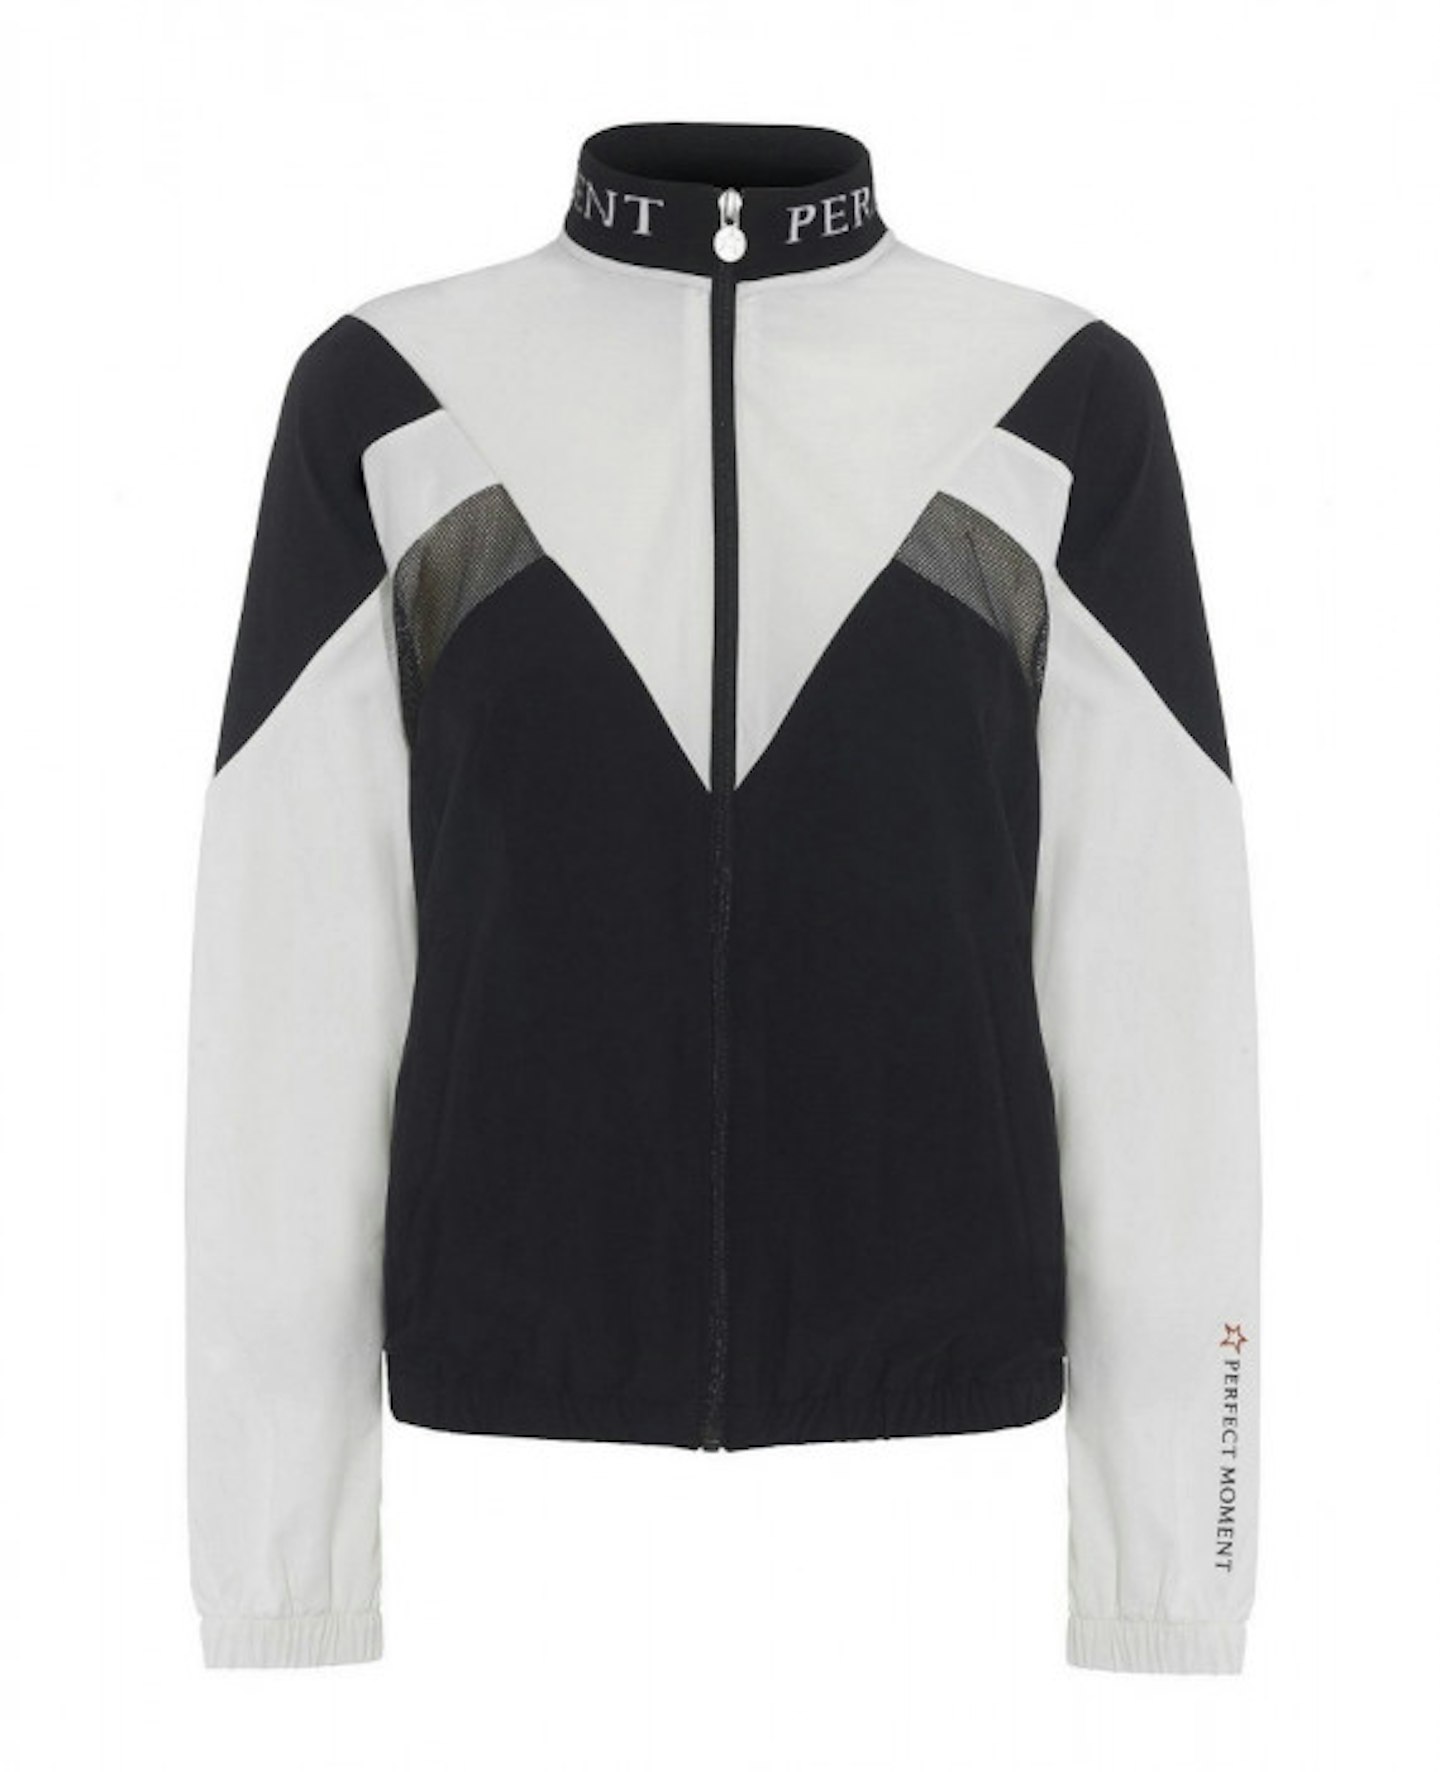 Perfect Moment, Imok Track Jacket, £195